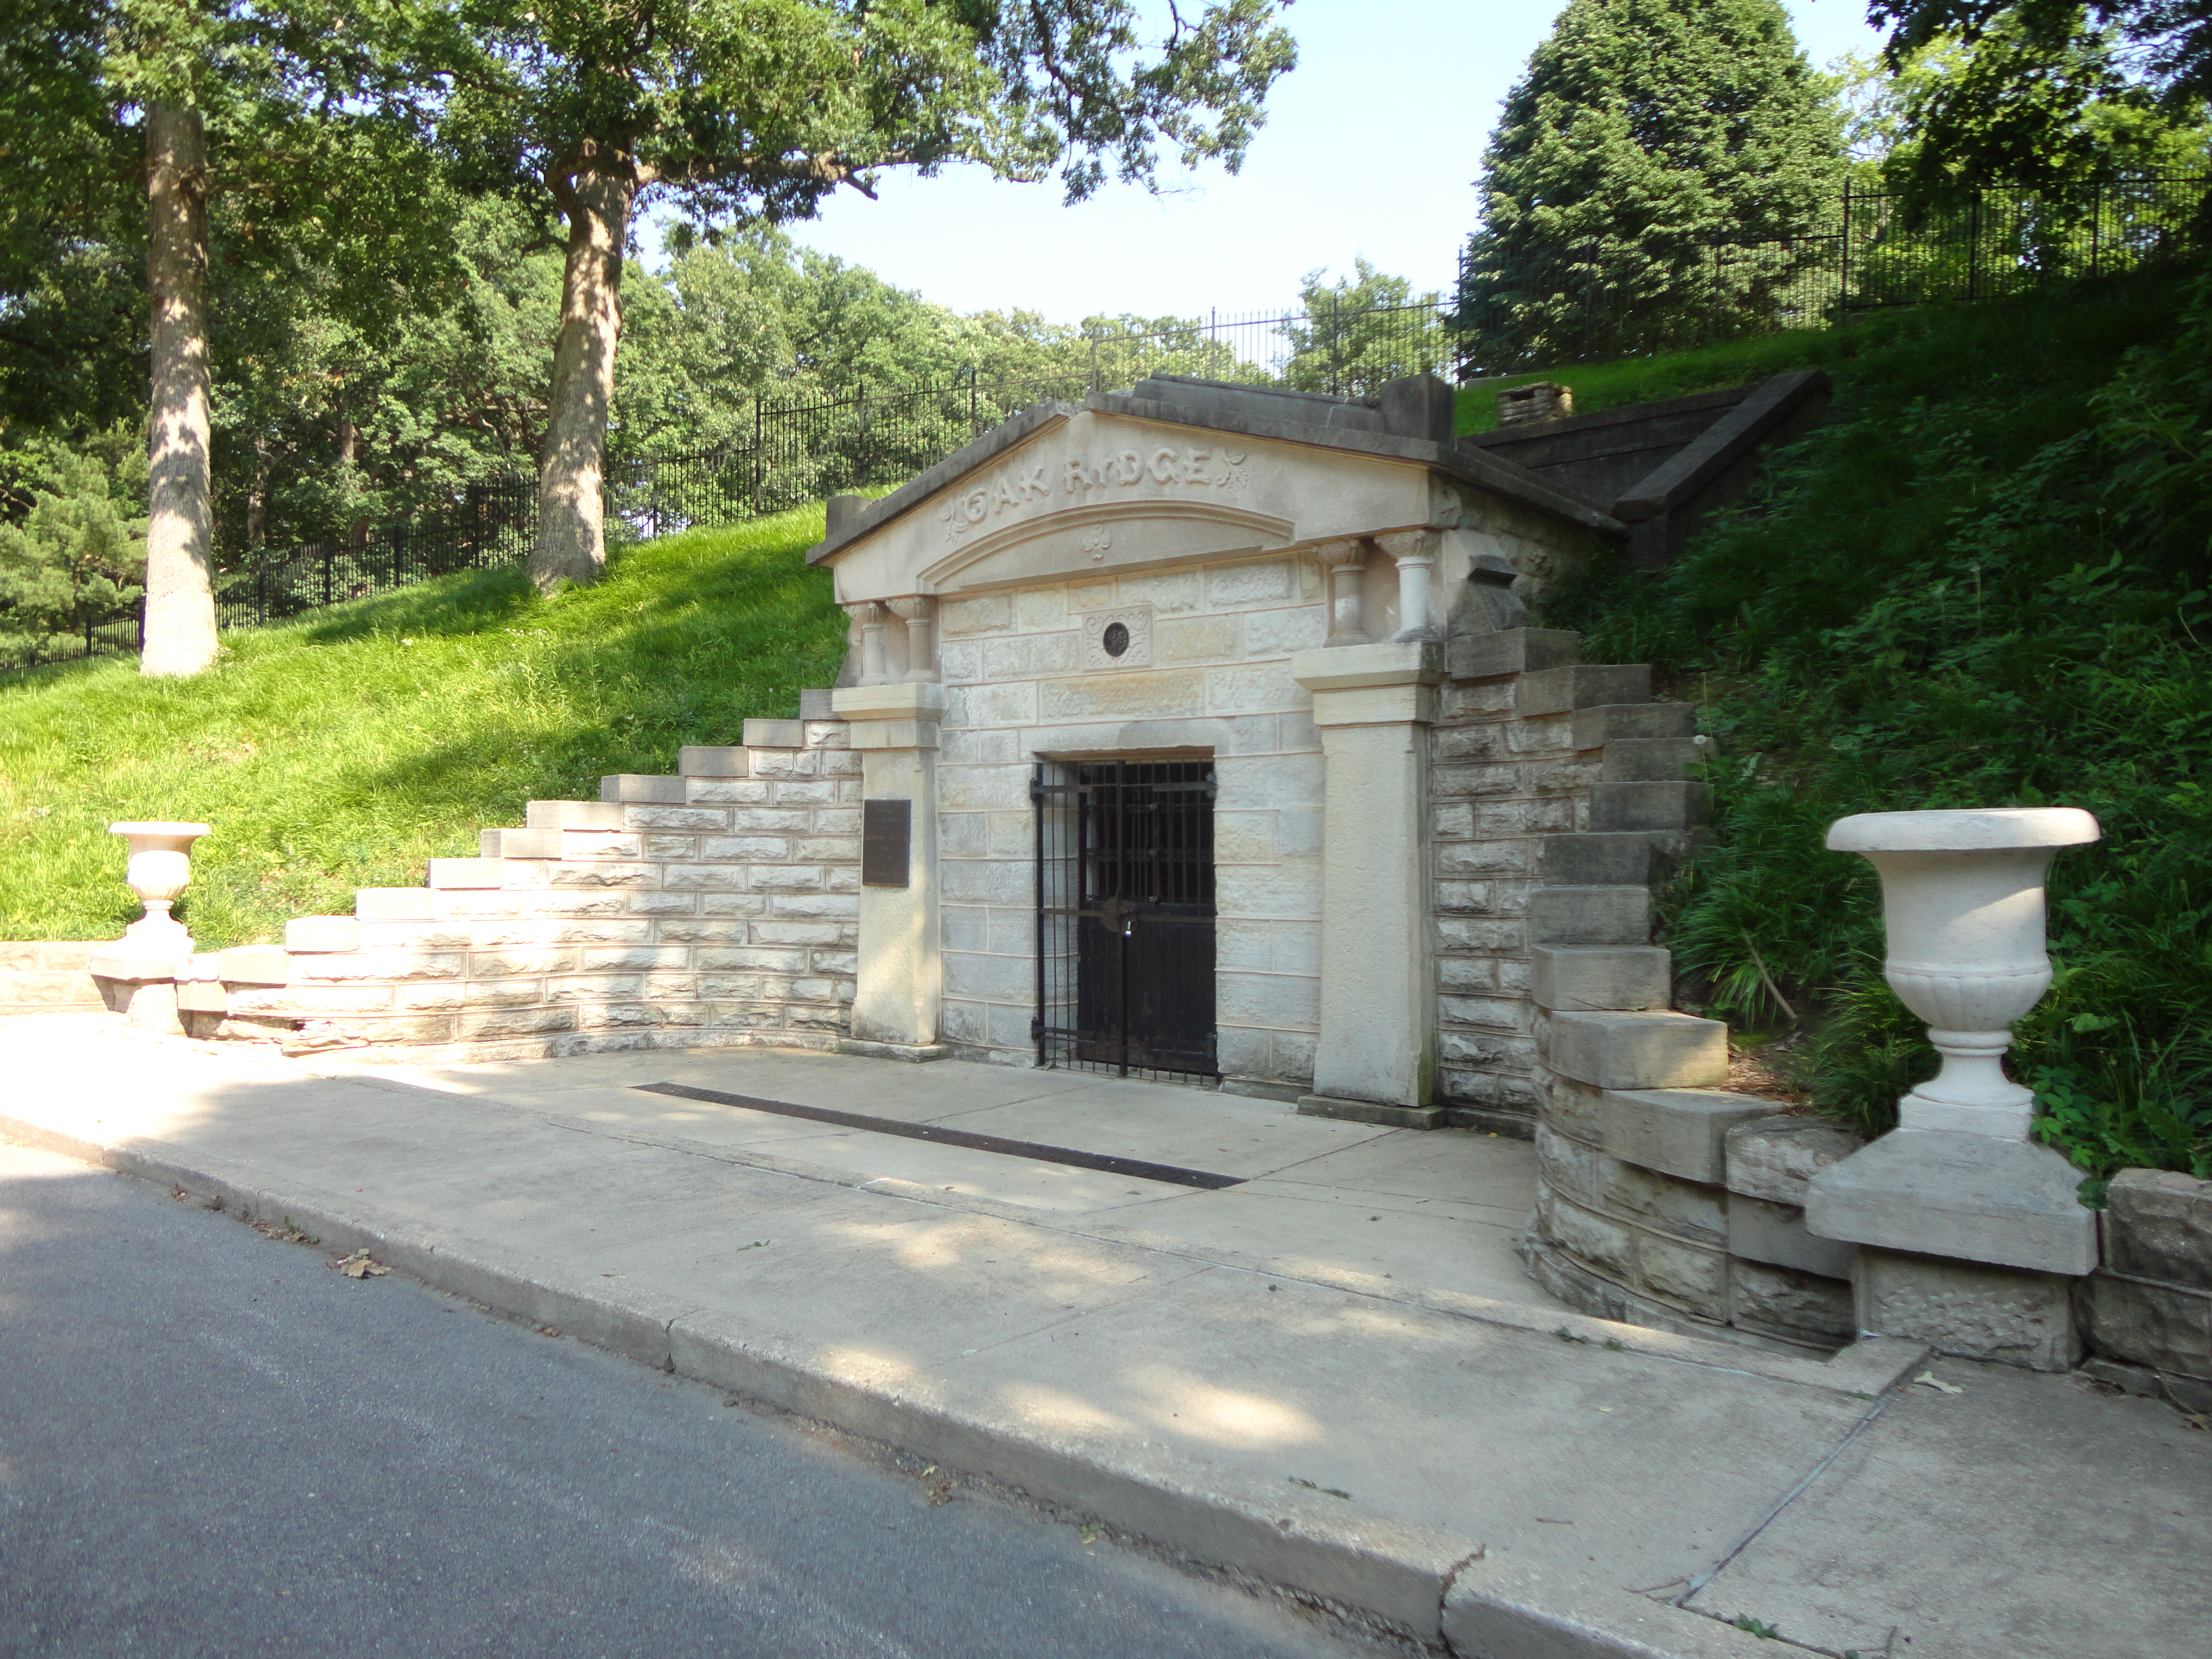 The Public Receiving Vault at Oak Ridge Cemetery where Abraham Lincoln's body was prior to being placed in Lincoln'sTomb